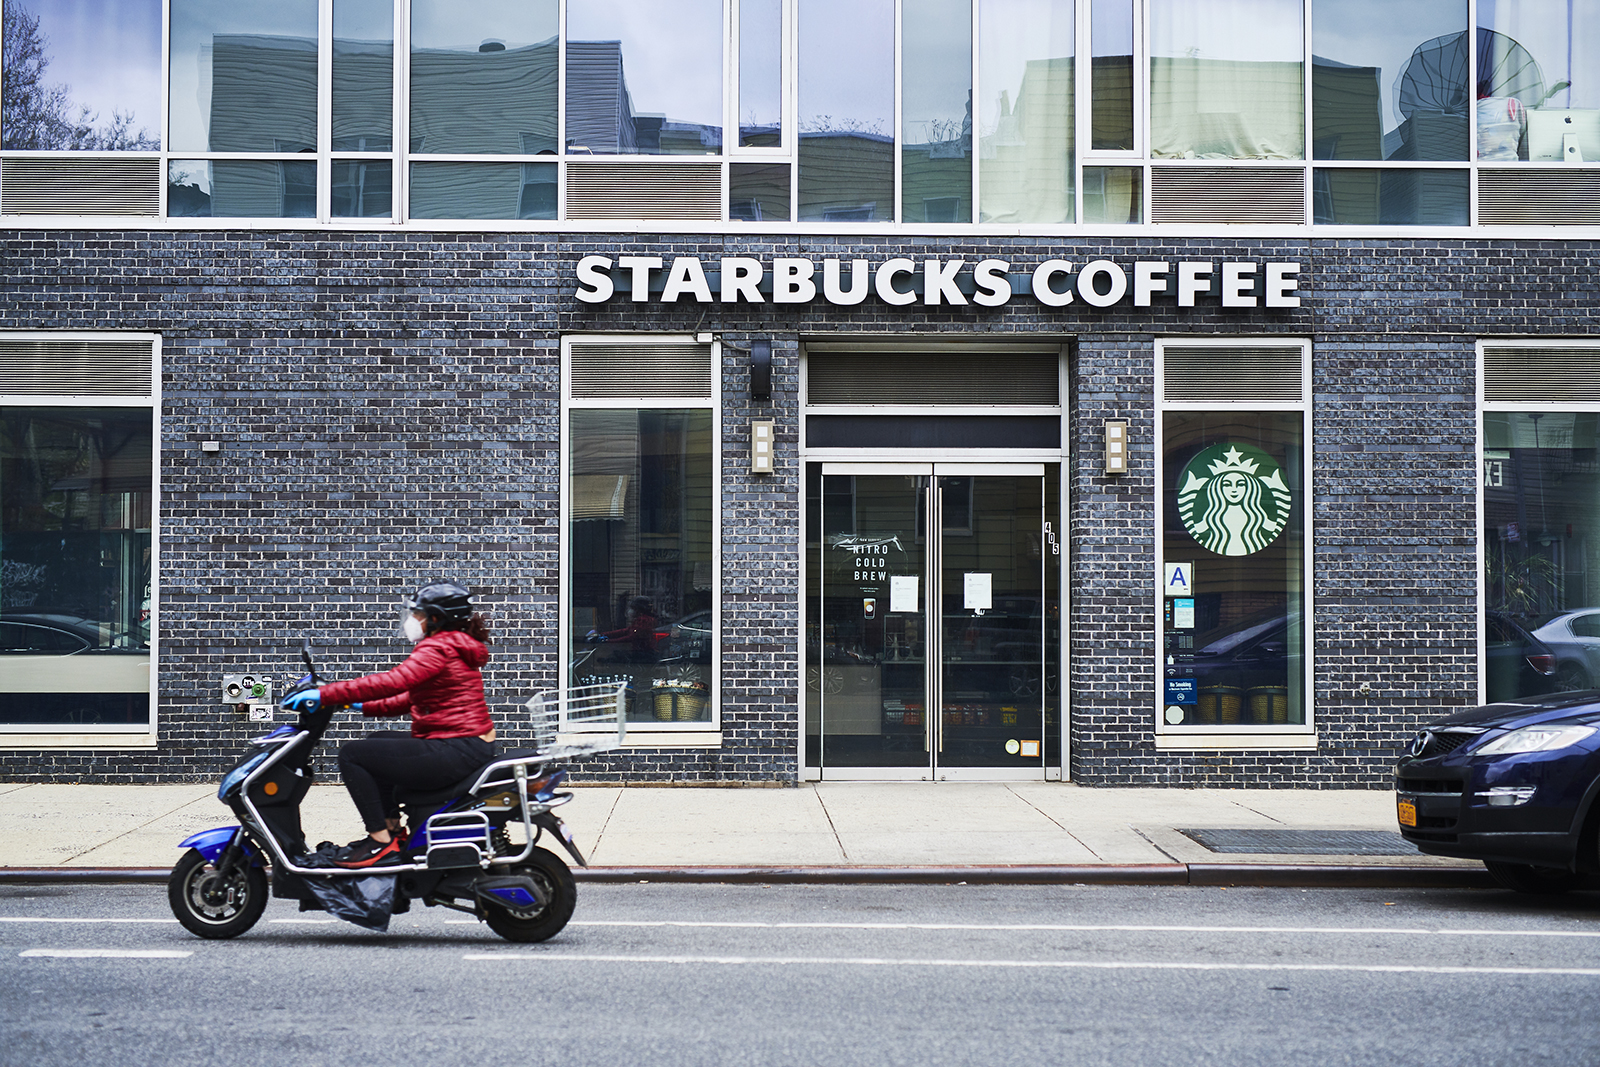 (CNN) — Starbucks is pivoting hundreds of North American stores away from the cafe model it helped make ubiquitous and will expand its pickup-only a